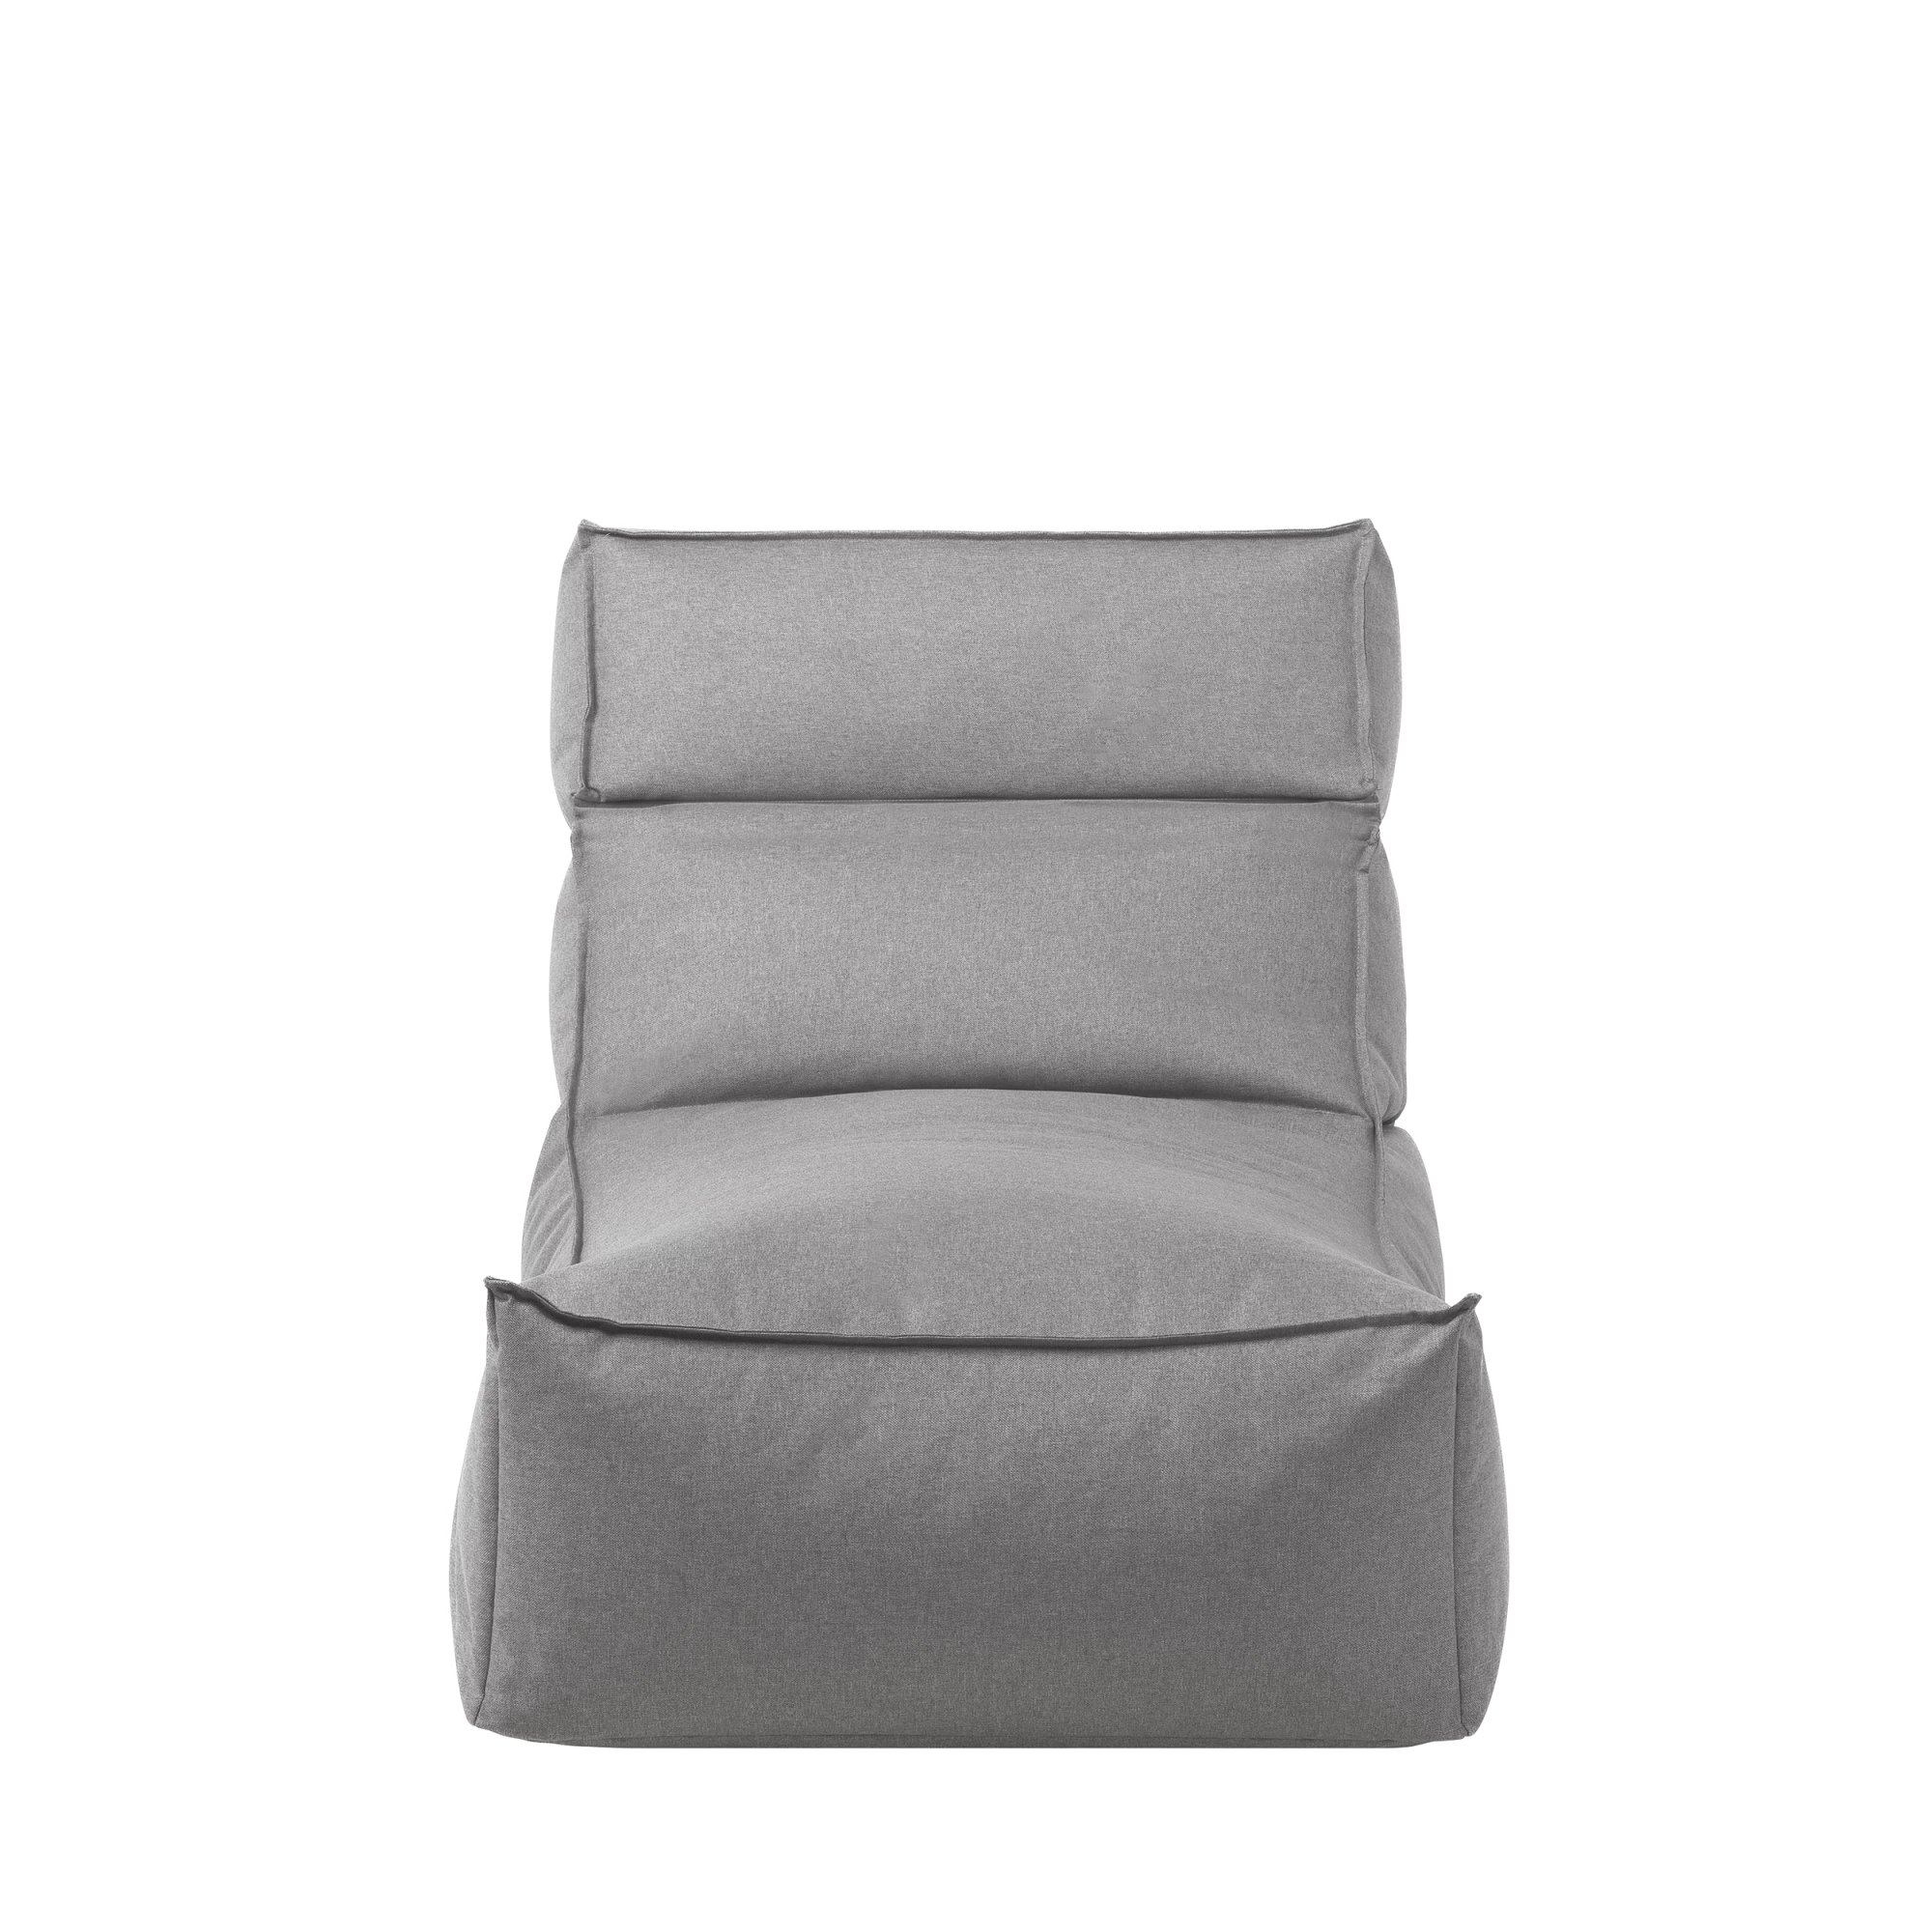 BLOMUS // STAY - OUTDOOR LOUNGER L | STONE